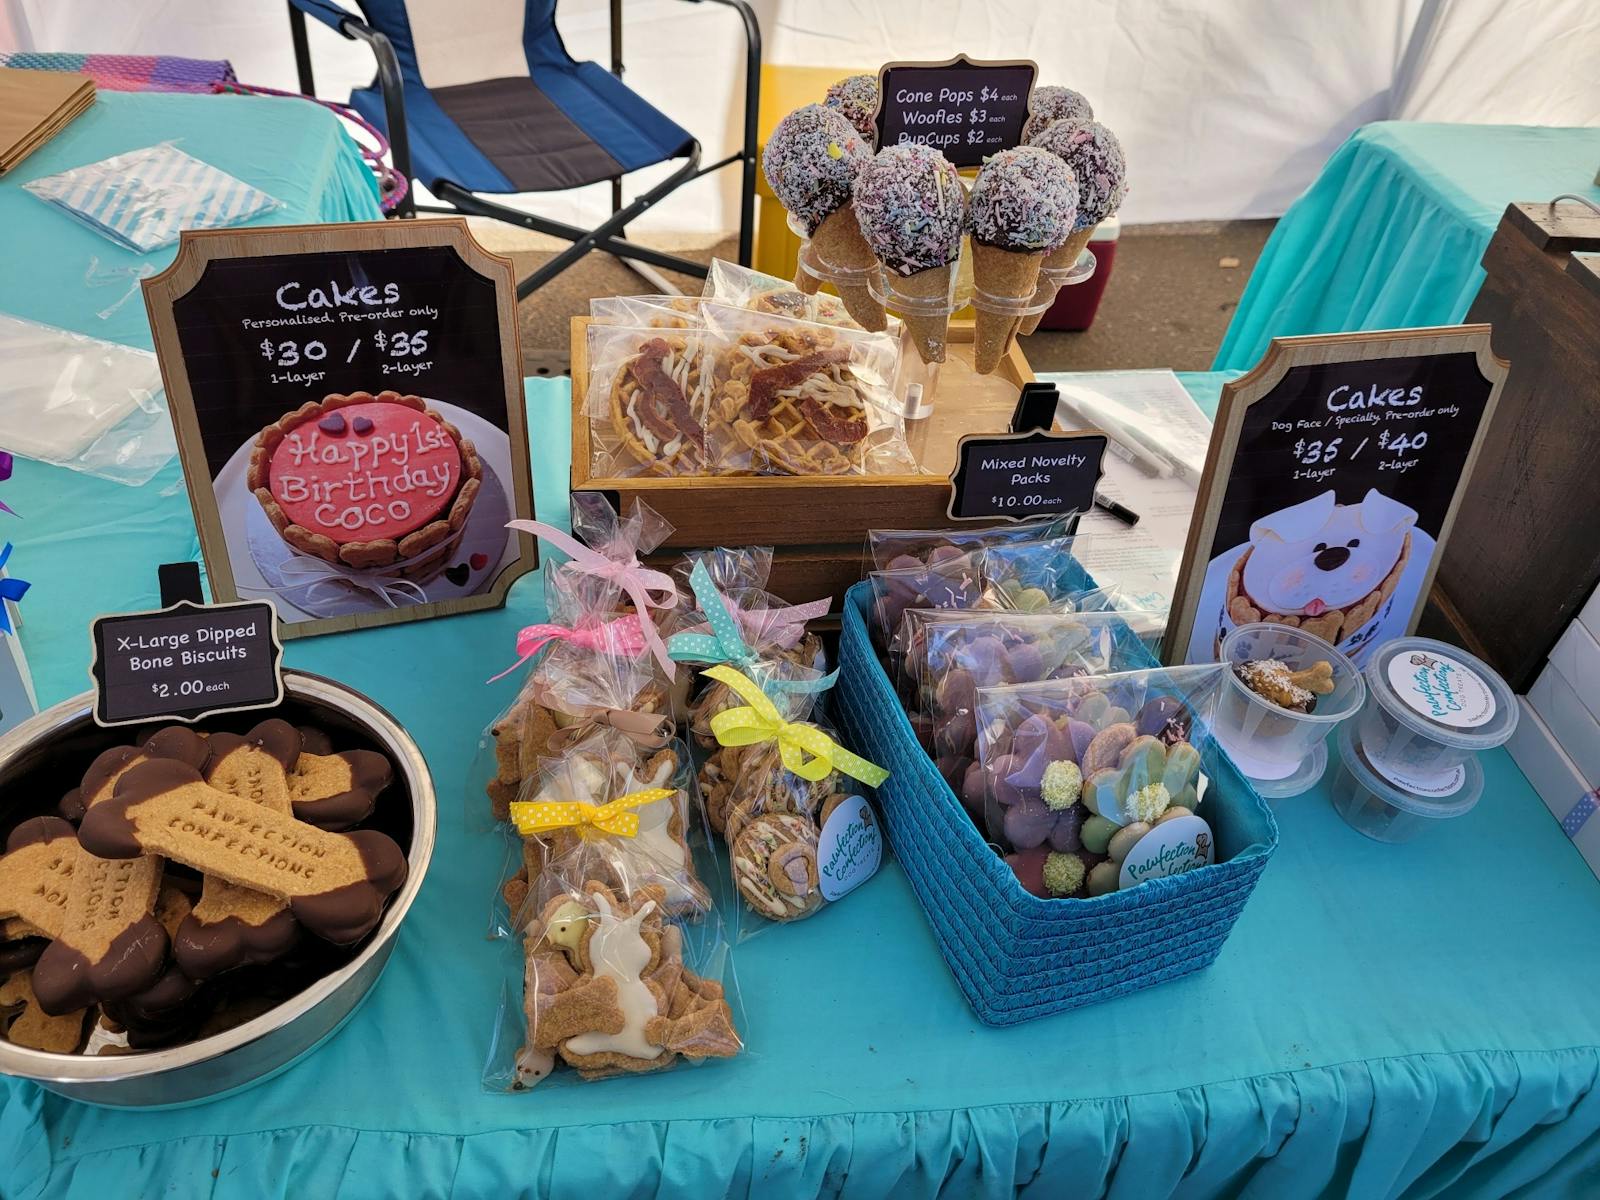 package dog treats on display to purchase